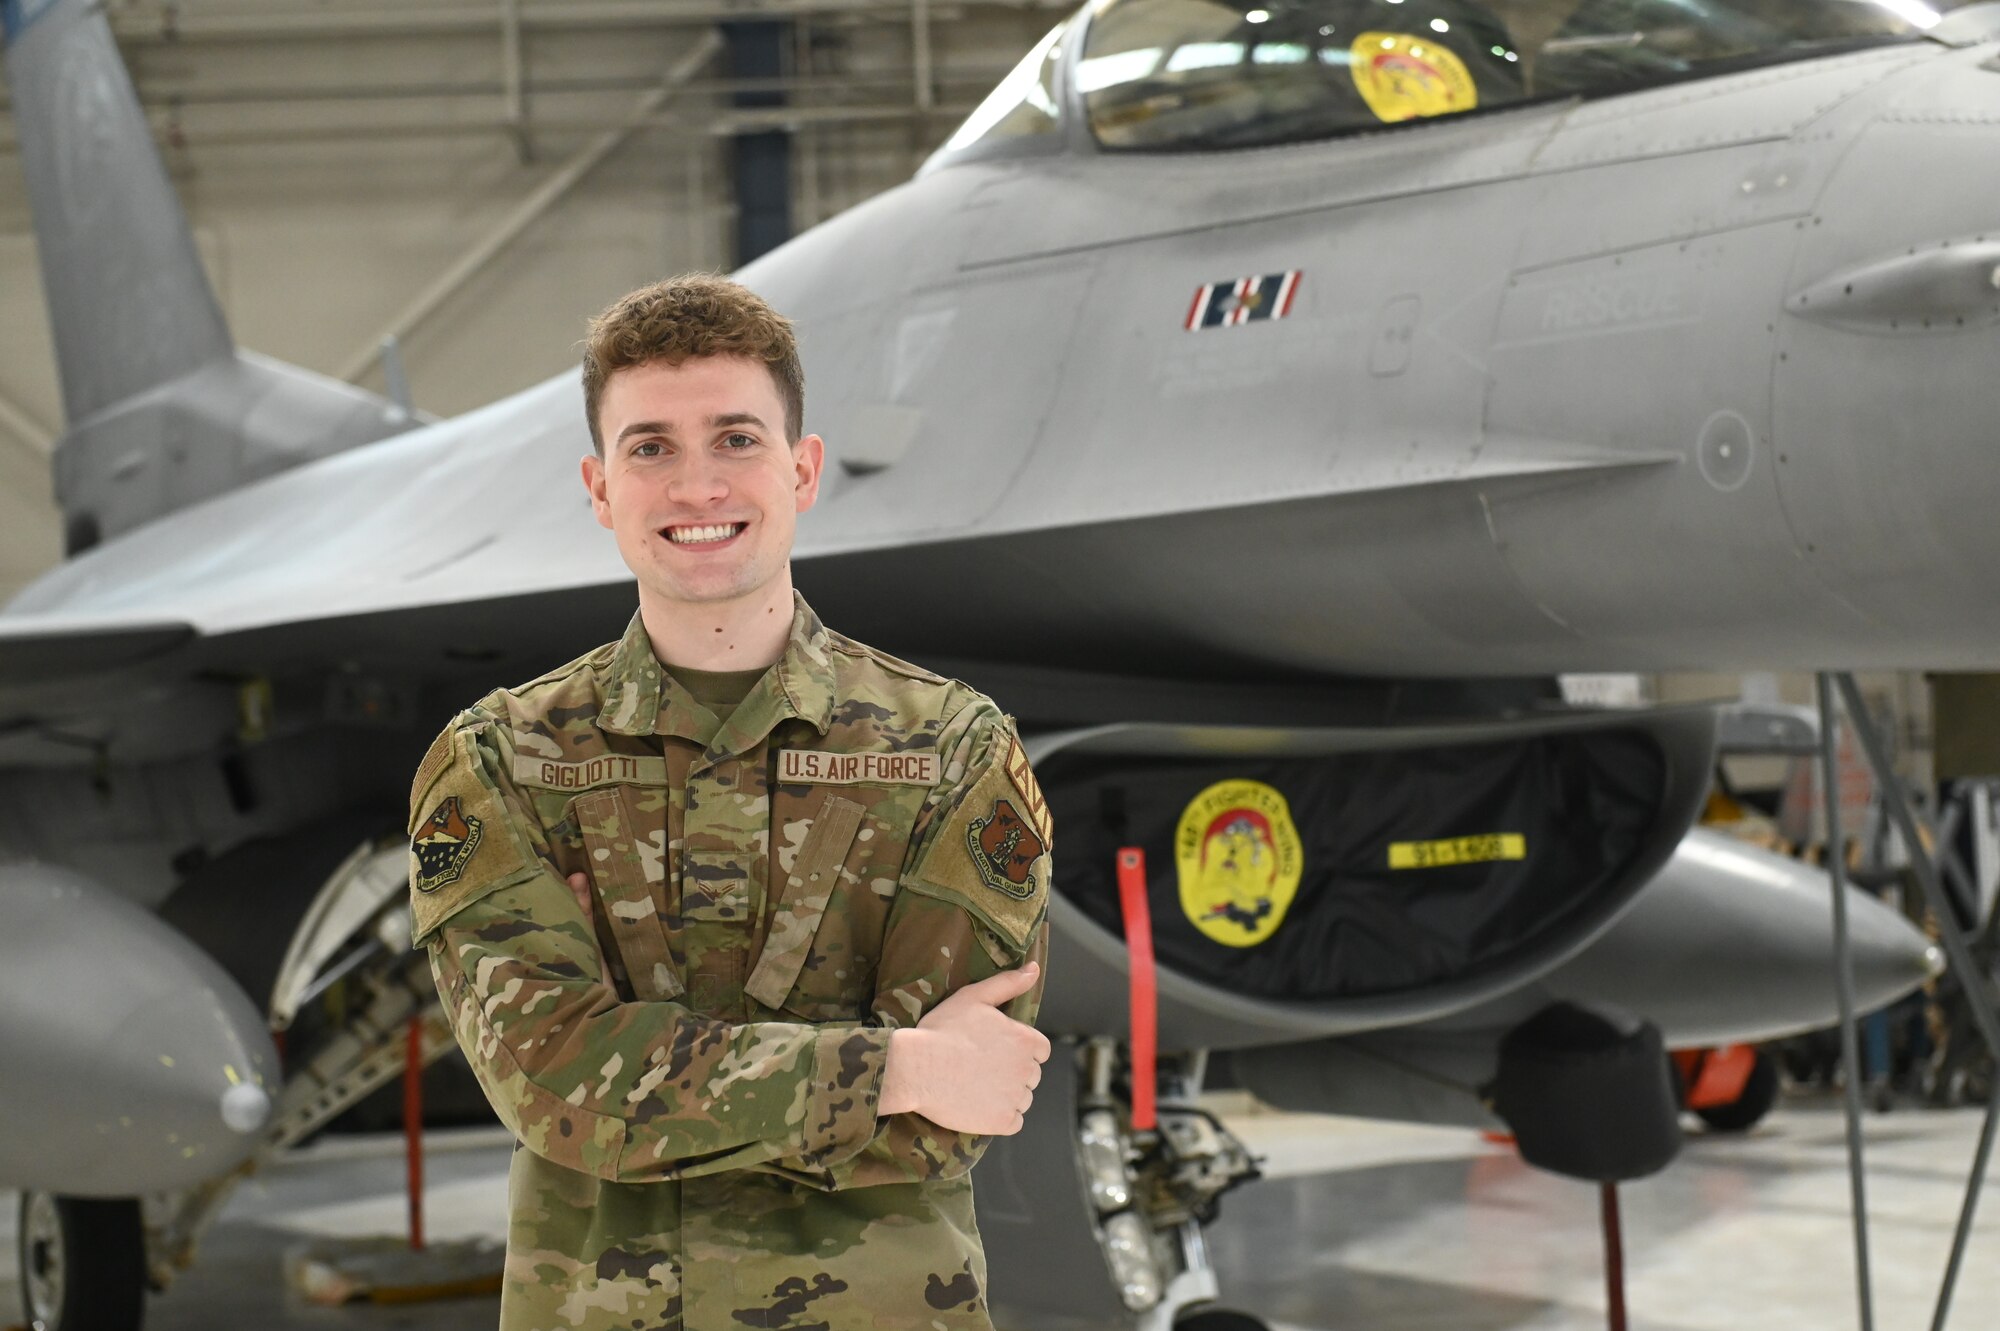 U.S. Air National Guard fighter aircraft integrated avionics specialist, Airman 1st Class Joey Gigliotti, poses for a photo in front of an F-16 Fighting Falcon assigned to the 148th Fighter Wing, Minnesota Air National Guard, on February 05, 2023. Gigliotti is one of seven airmen assigned to the 148th Fighter Wing who earned the highest possible ASVAB AFQT score of 99.